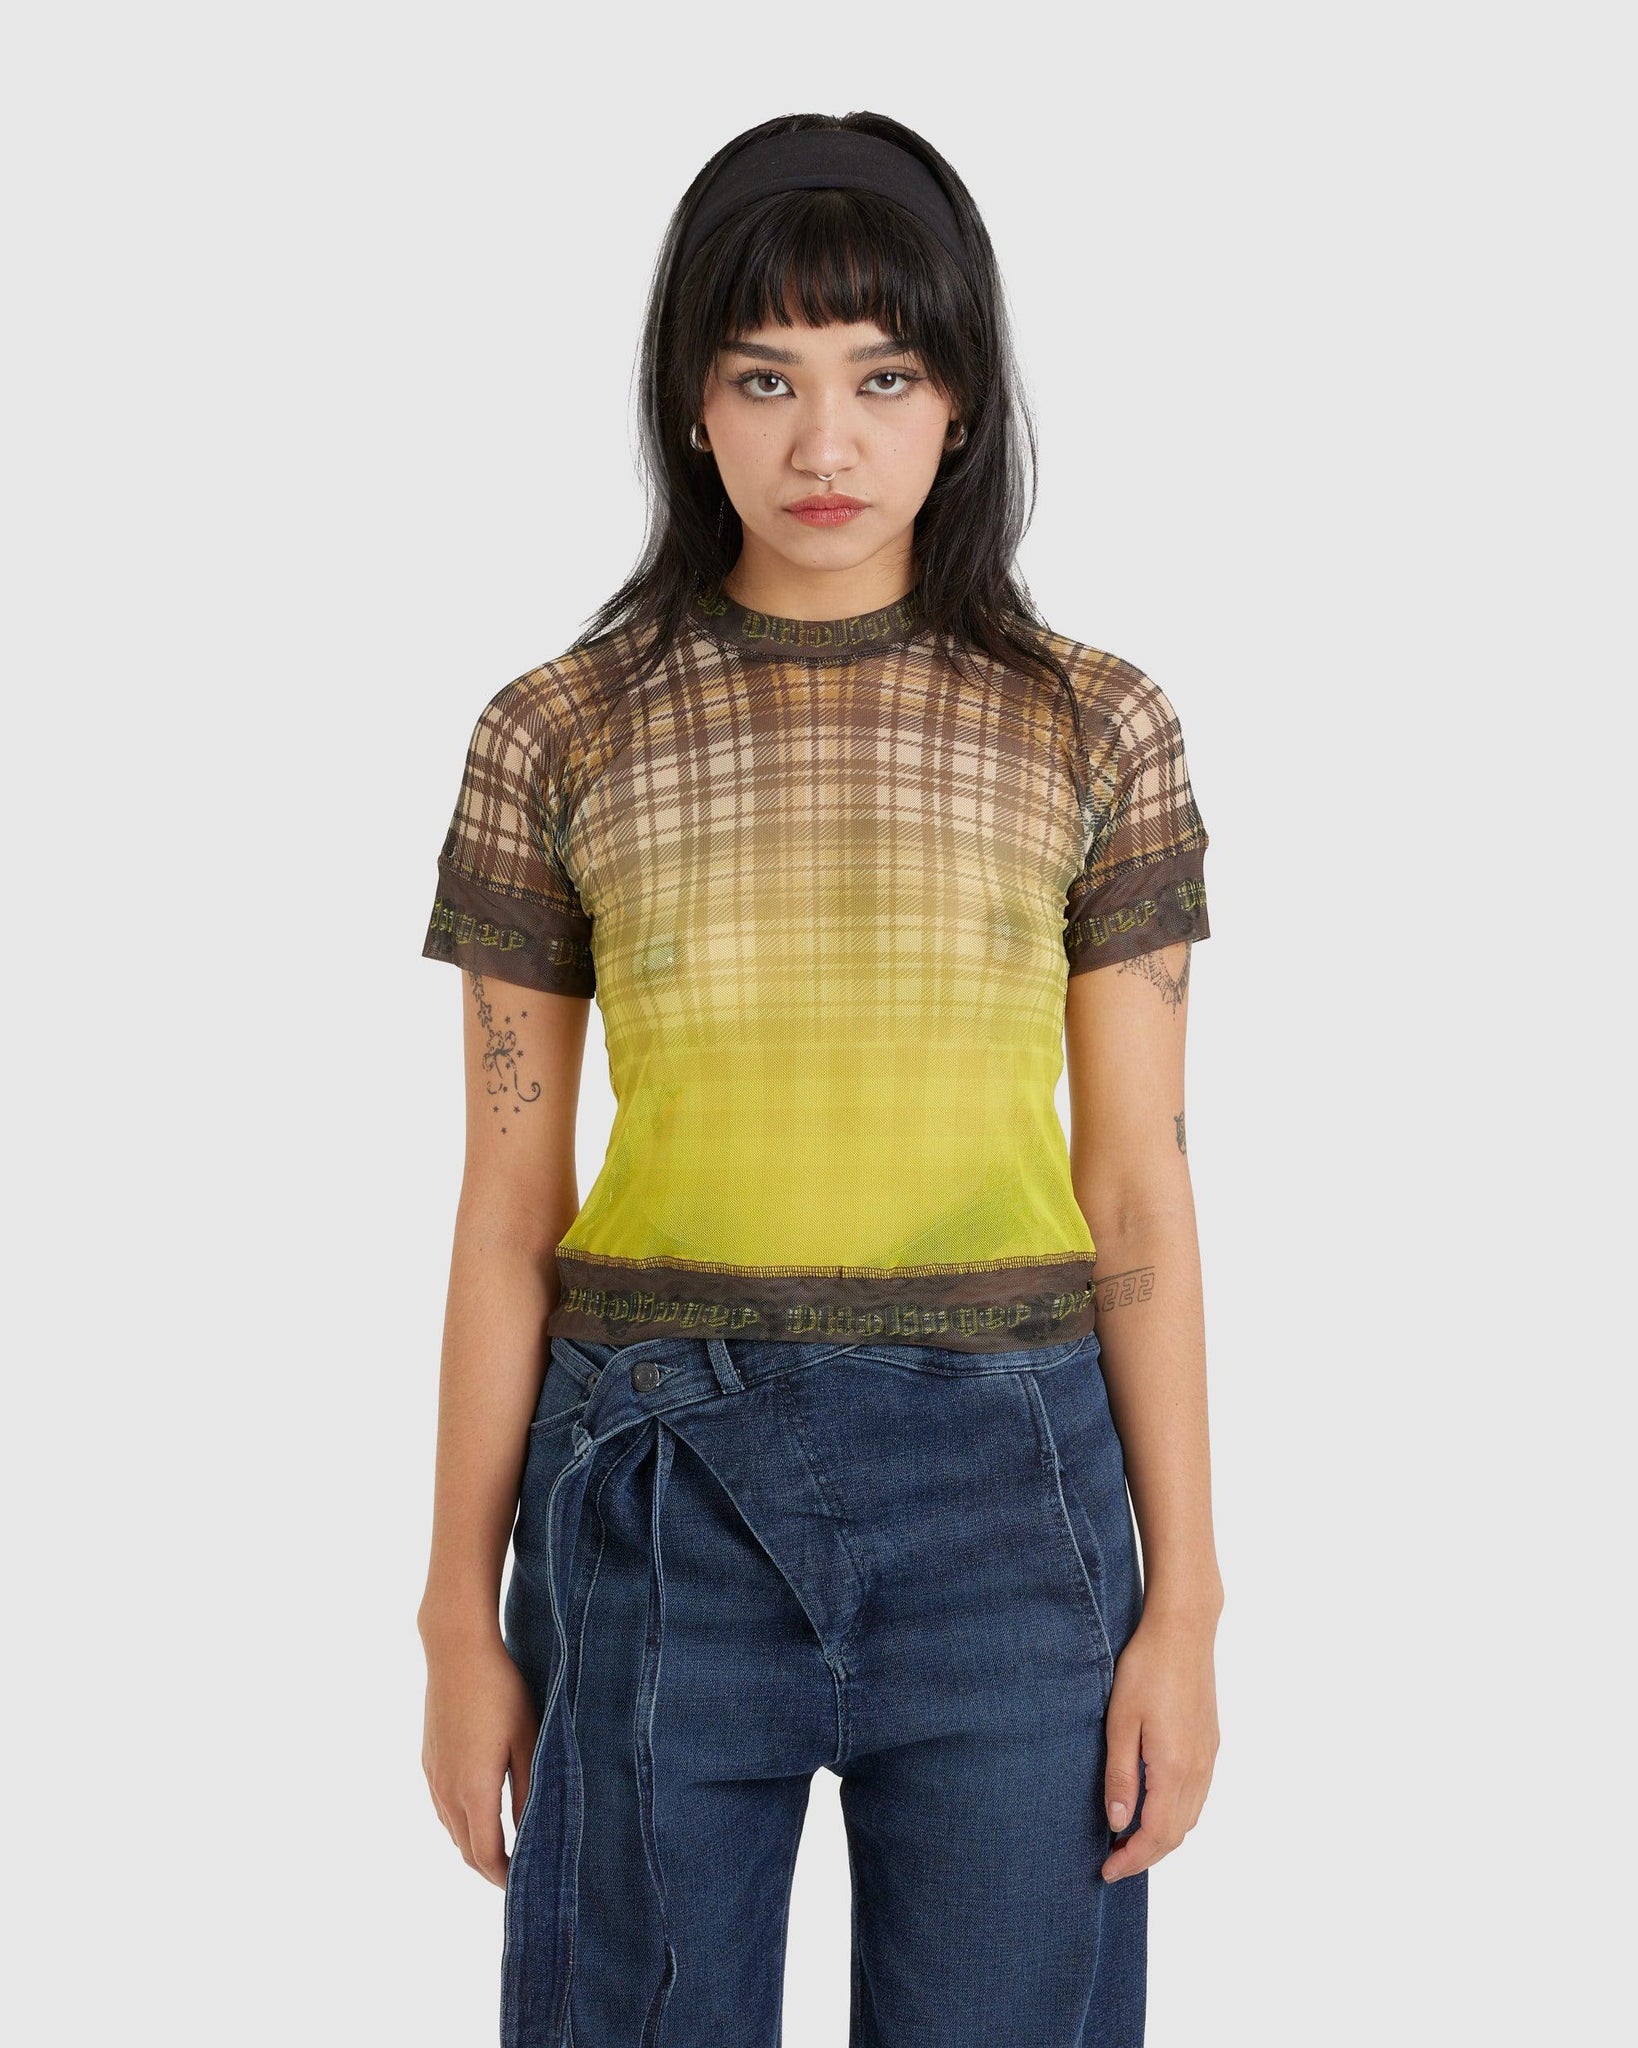 Mesh T-Shirt Yellow Plaid - {{ collection.title }} - Chinatown Country Club 